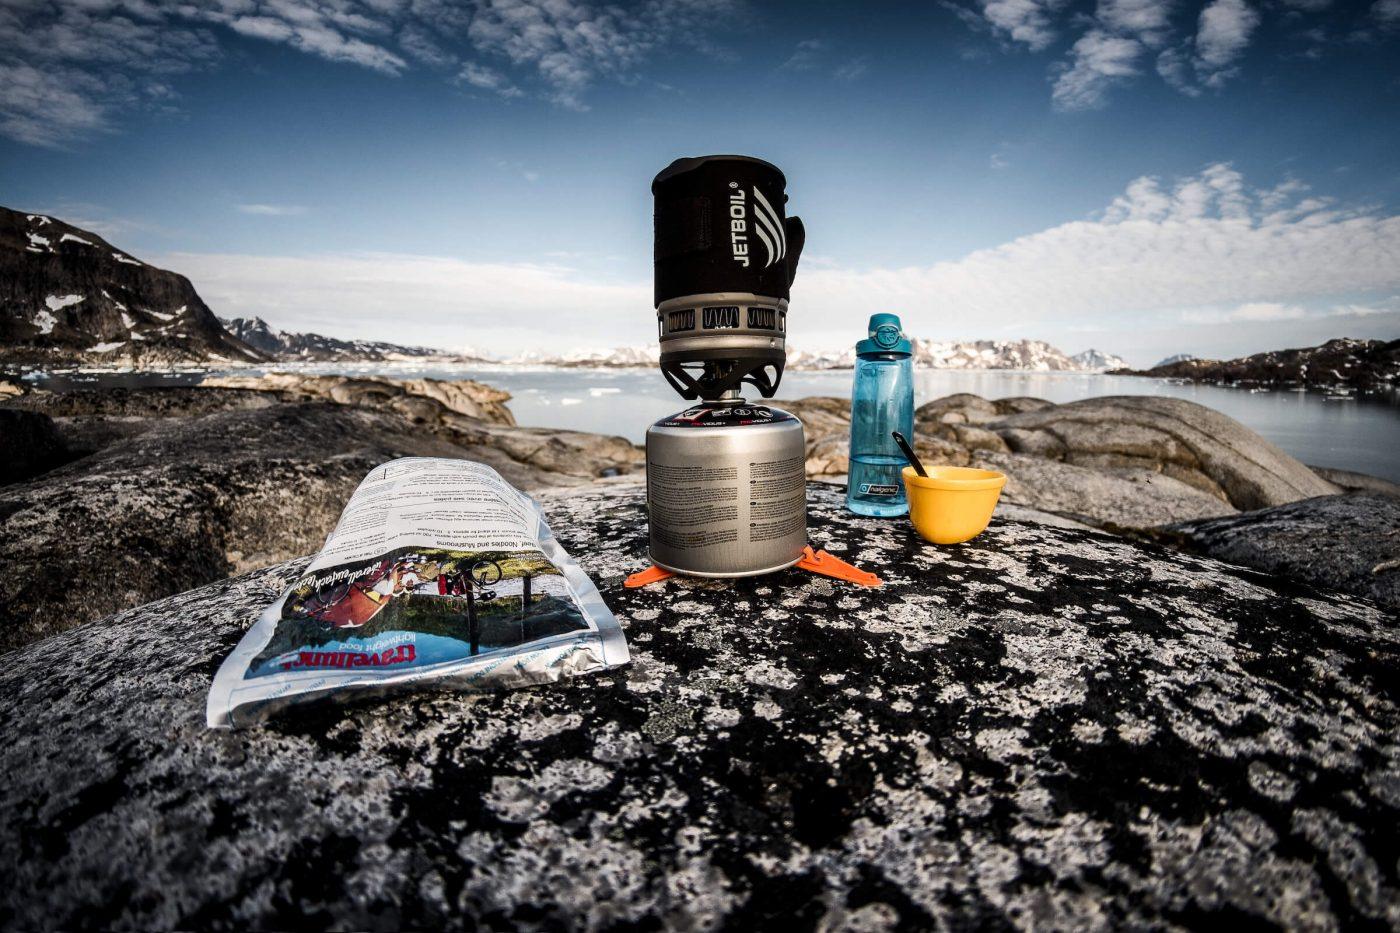 Cooking gear and freeze dried food on a rock near Kulusuk in East Greenland. By Mads Pihl